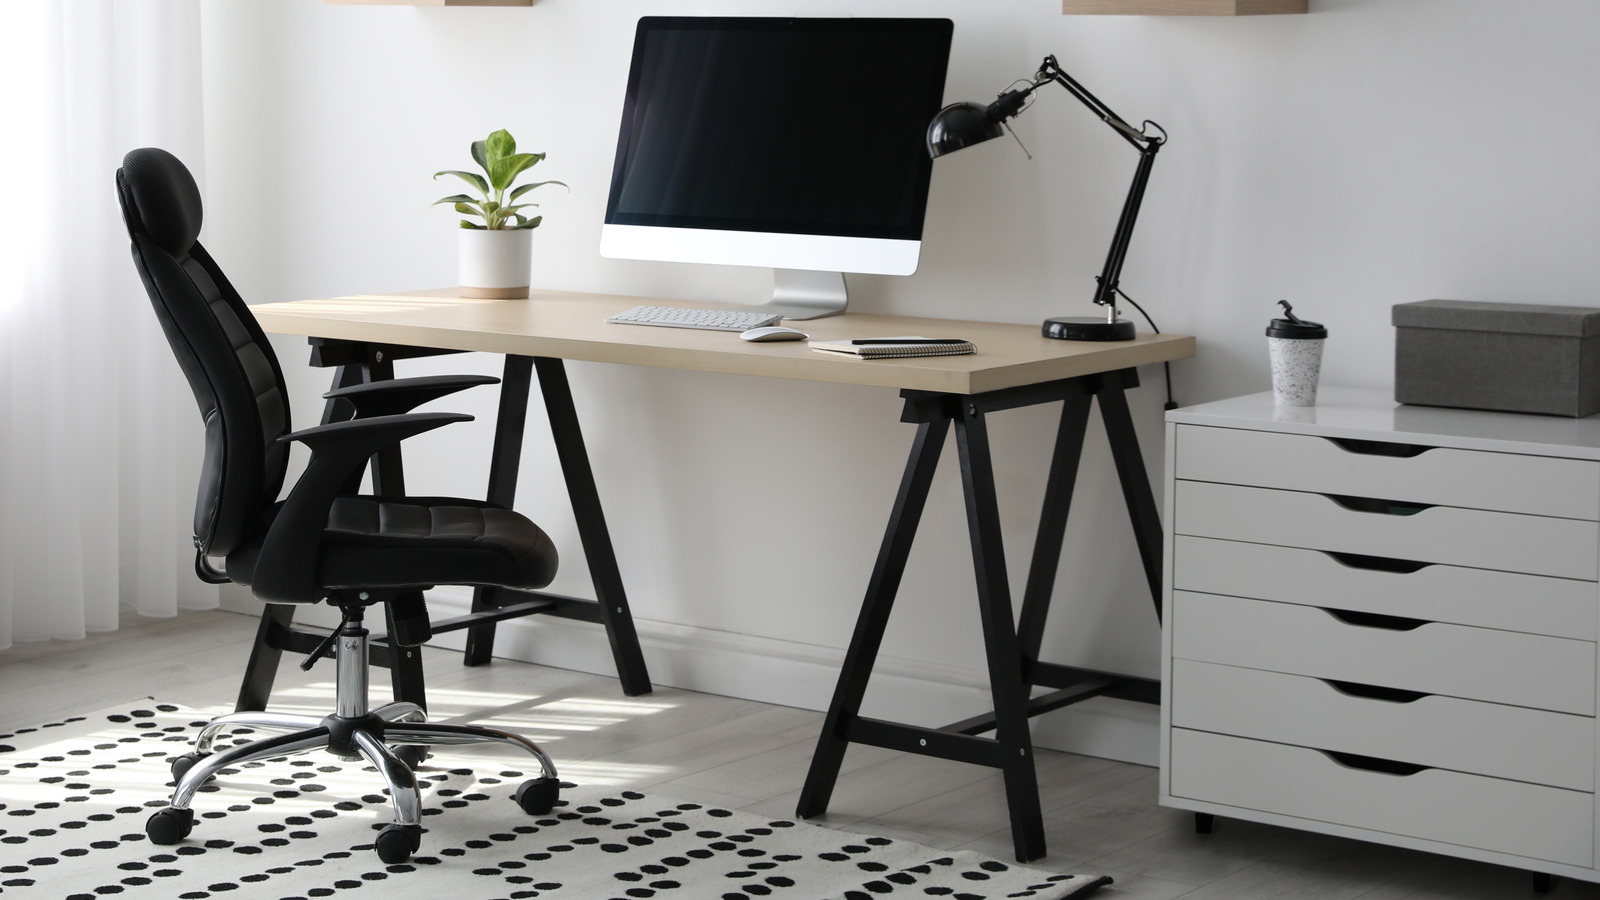 15 Must-Haves To Update Your Home Office